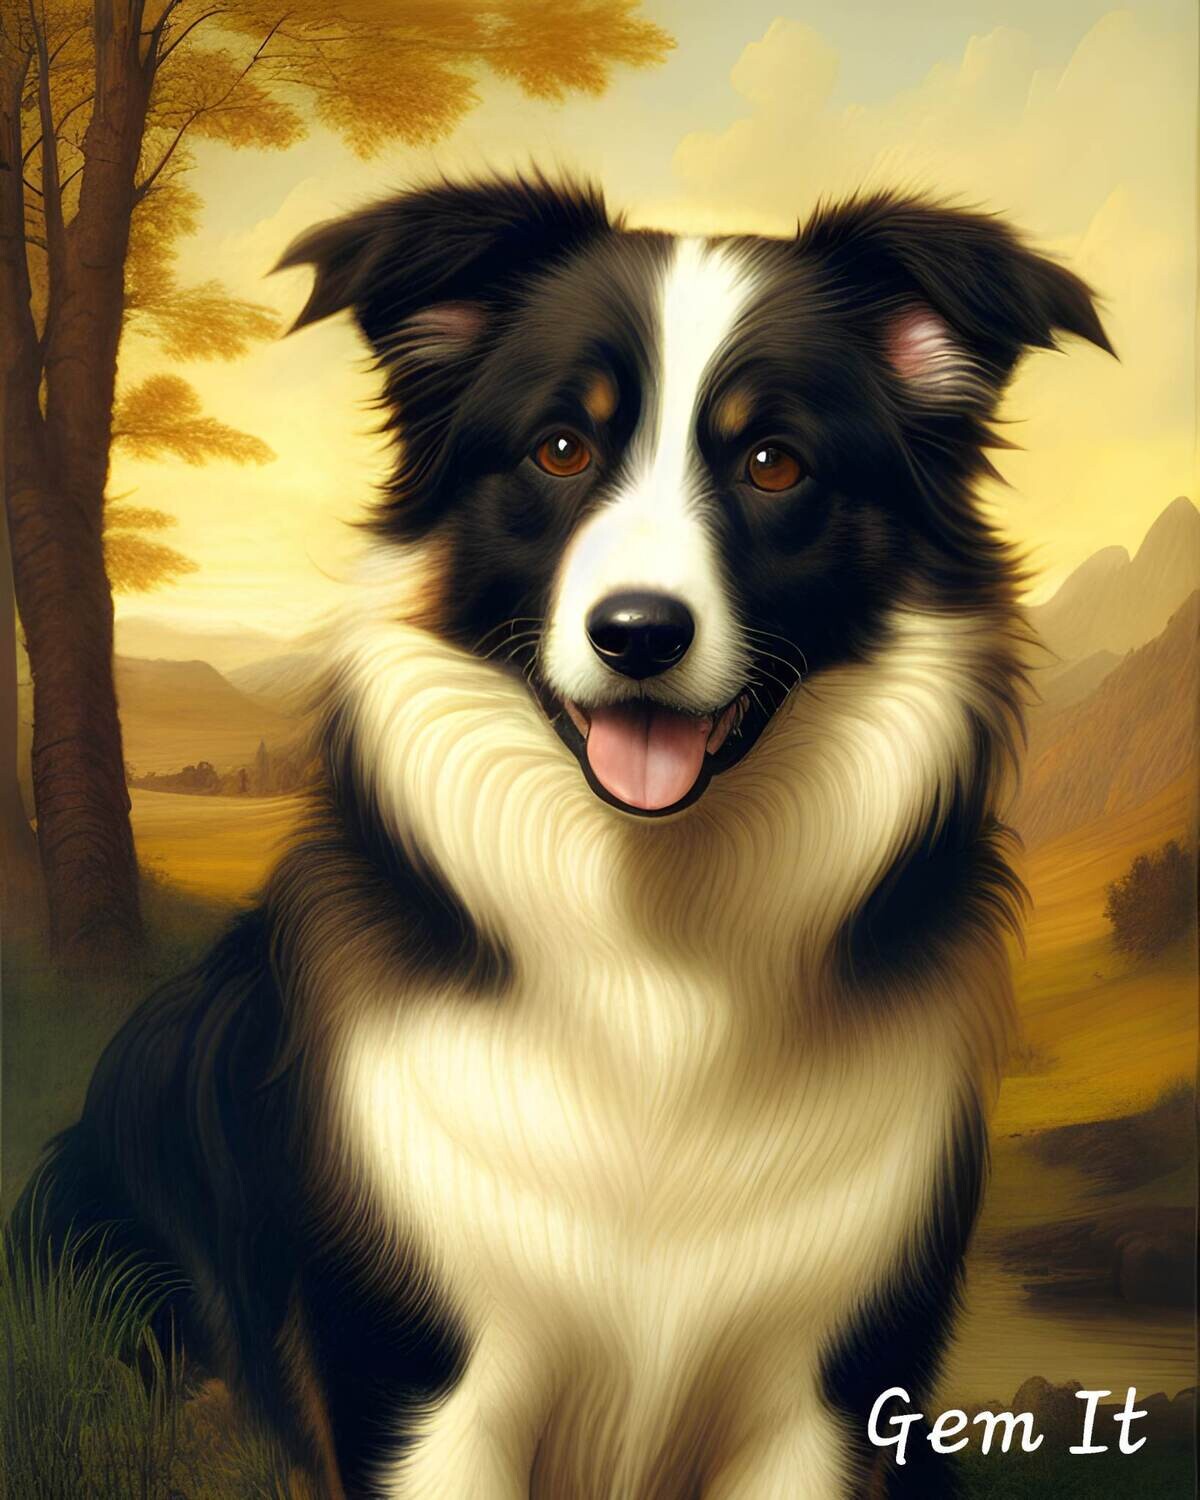 Border Collie 207 - Specially ordered for you. Delivery is approximately 4 - 6 weeks.